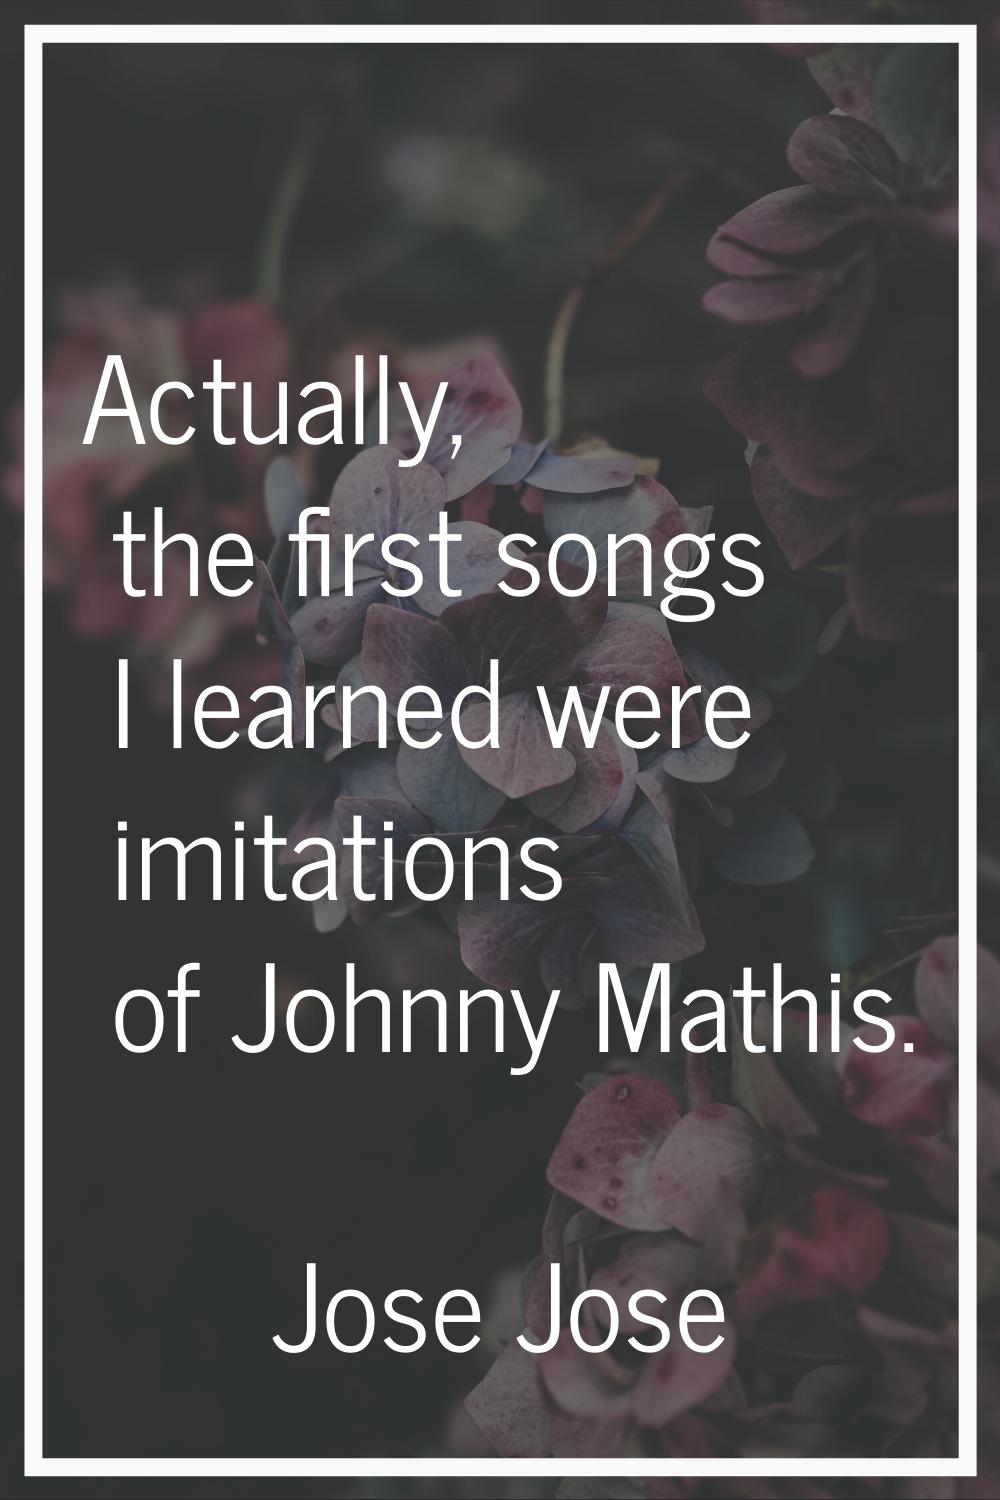 Actually, the first songs I learned were imitations of Johnny Mathis.